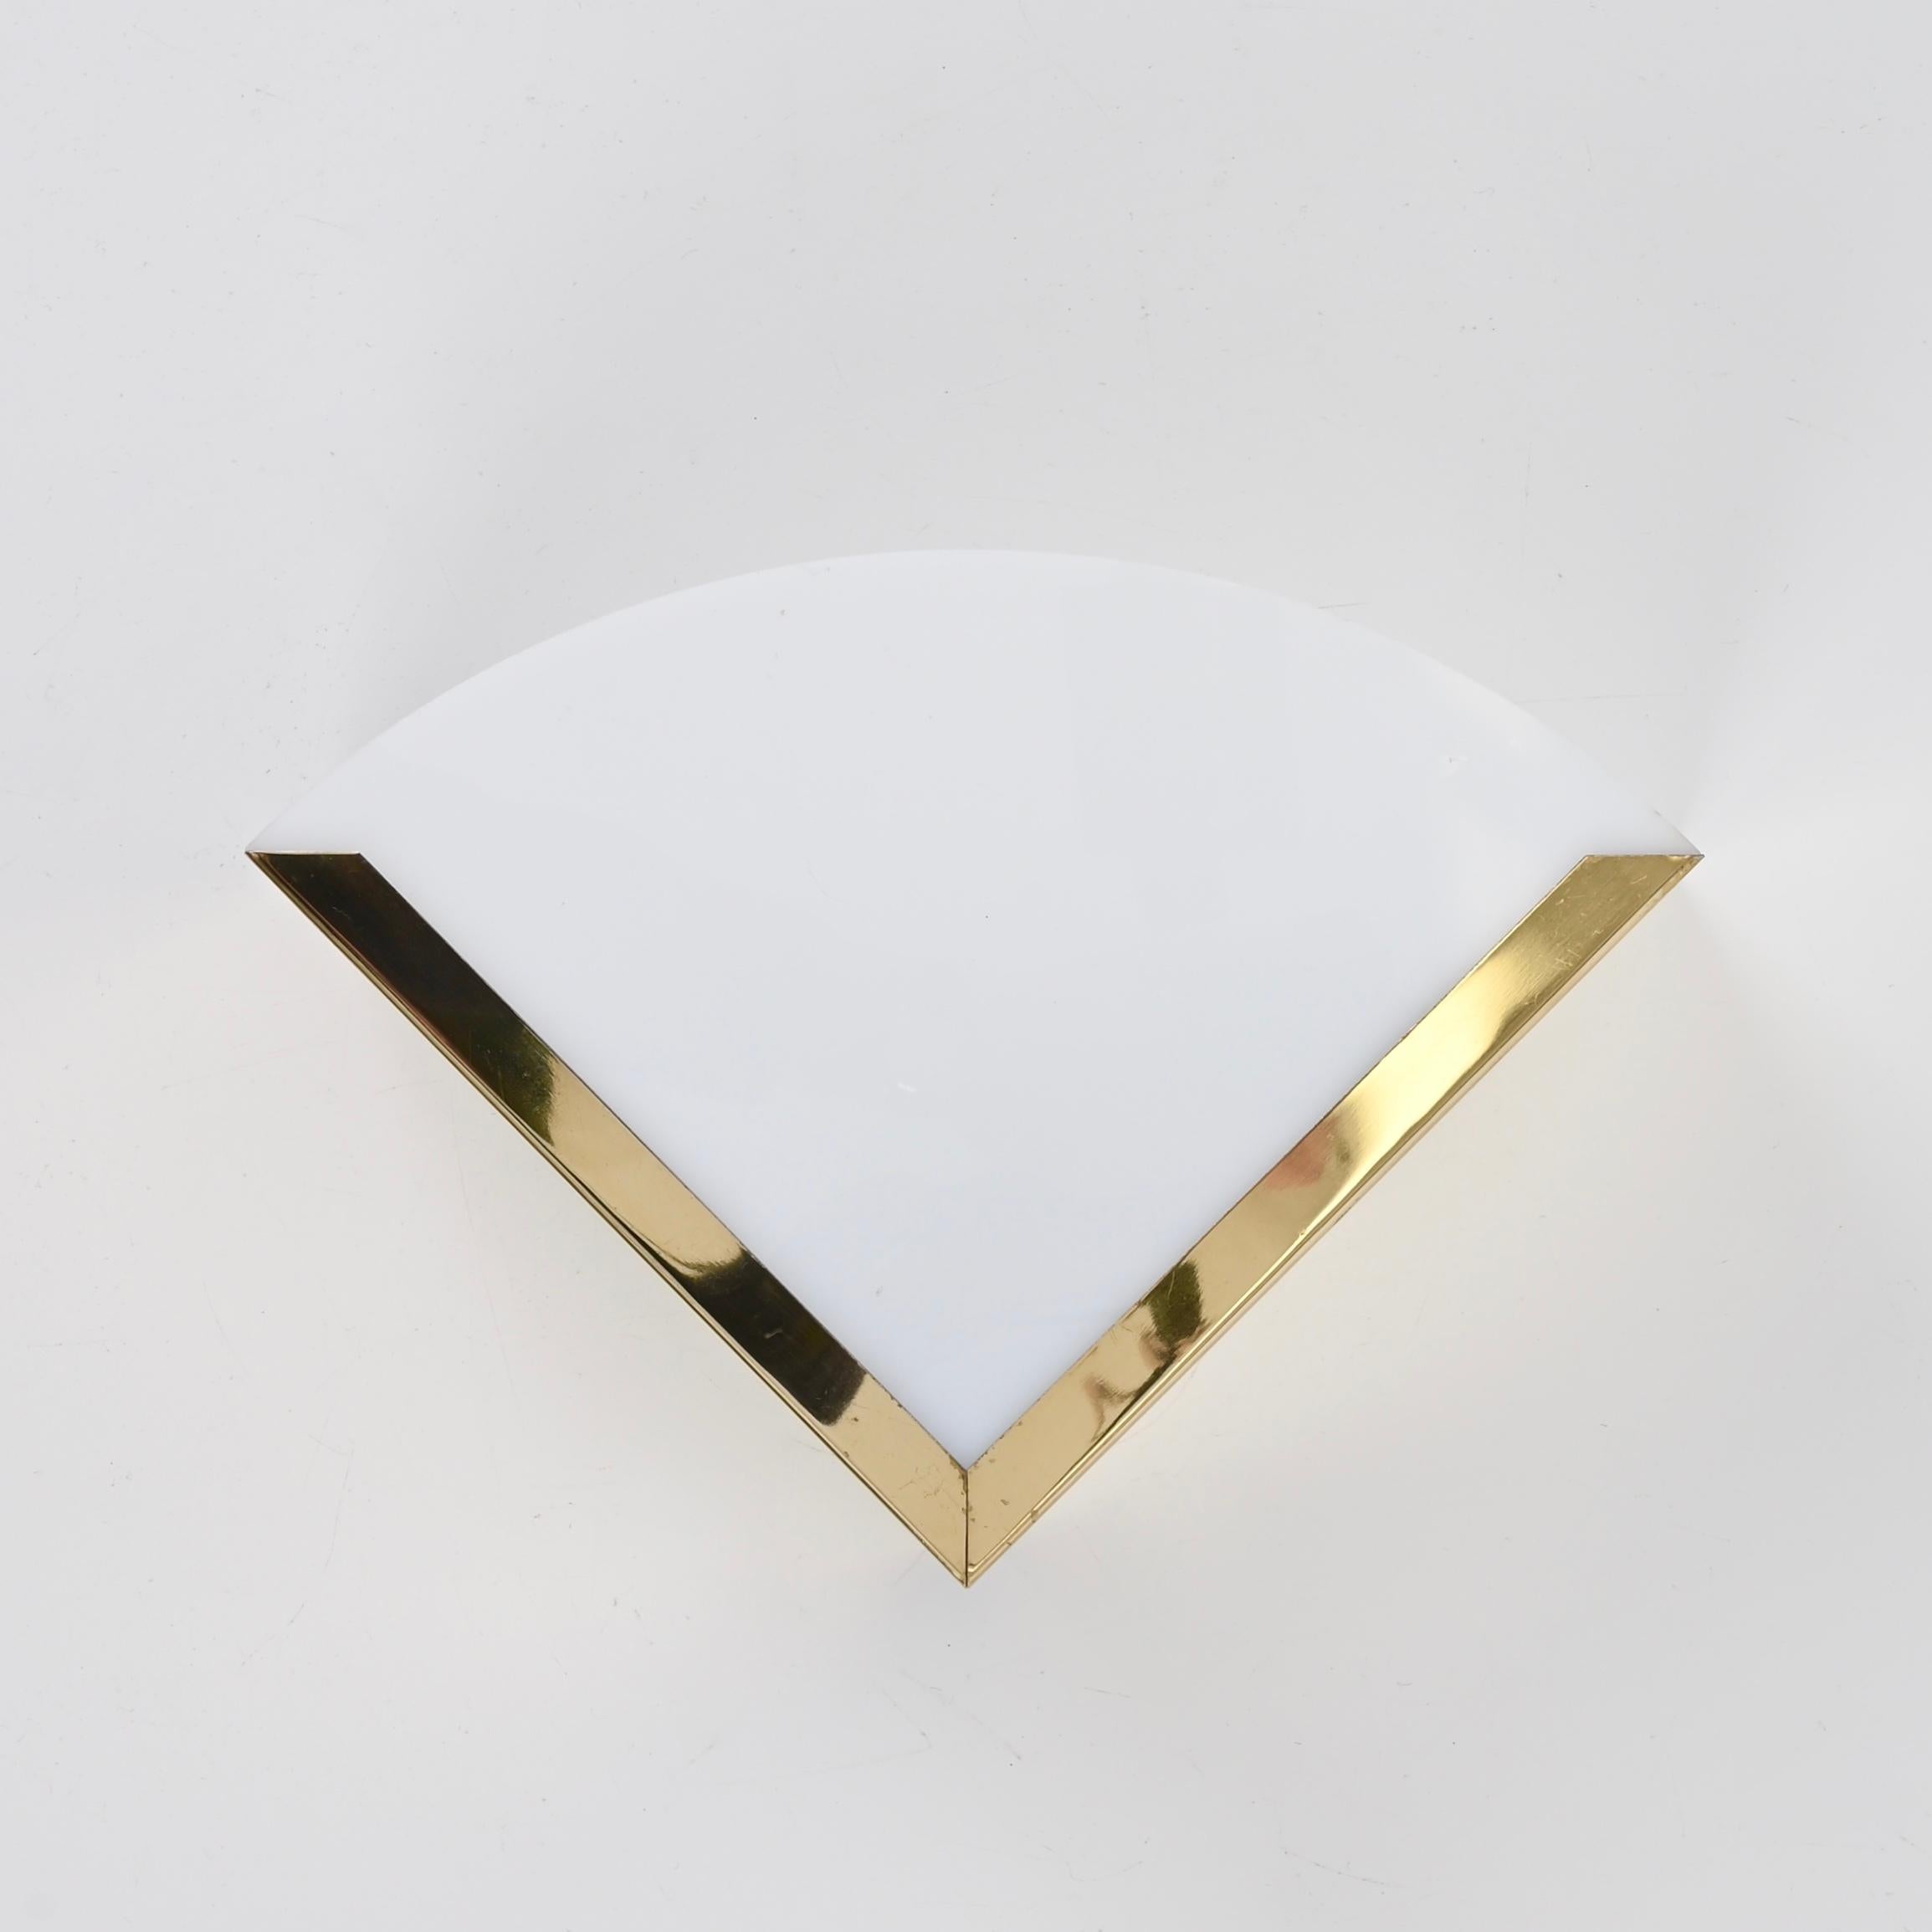 20th Century Italian Triangular Sconces in Brass and White Perspex, Italy 1970s For Sale